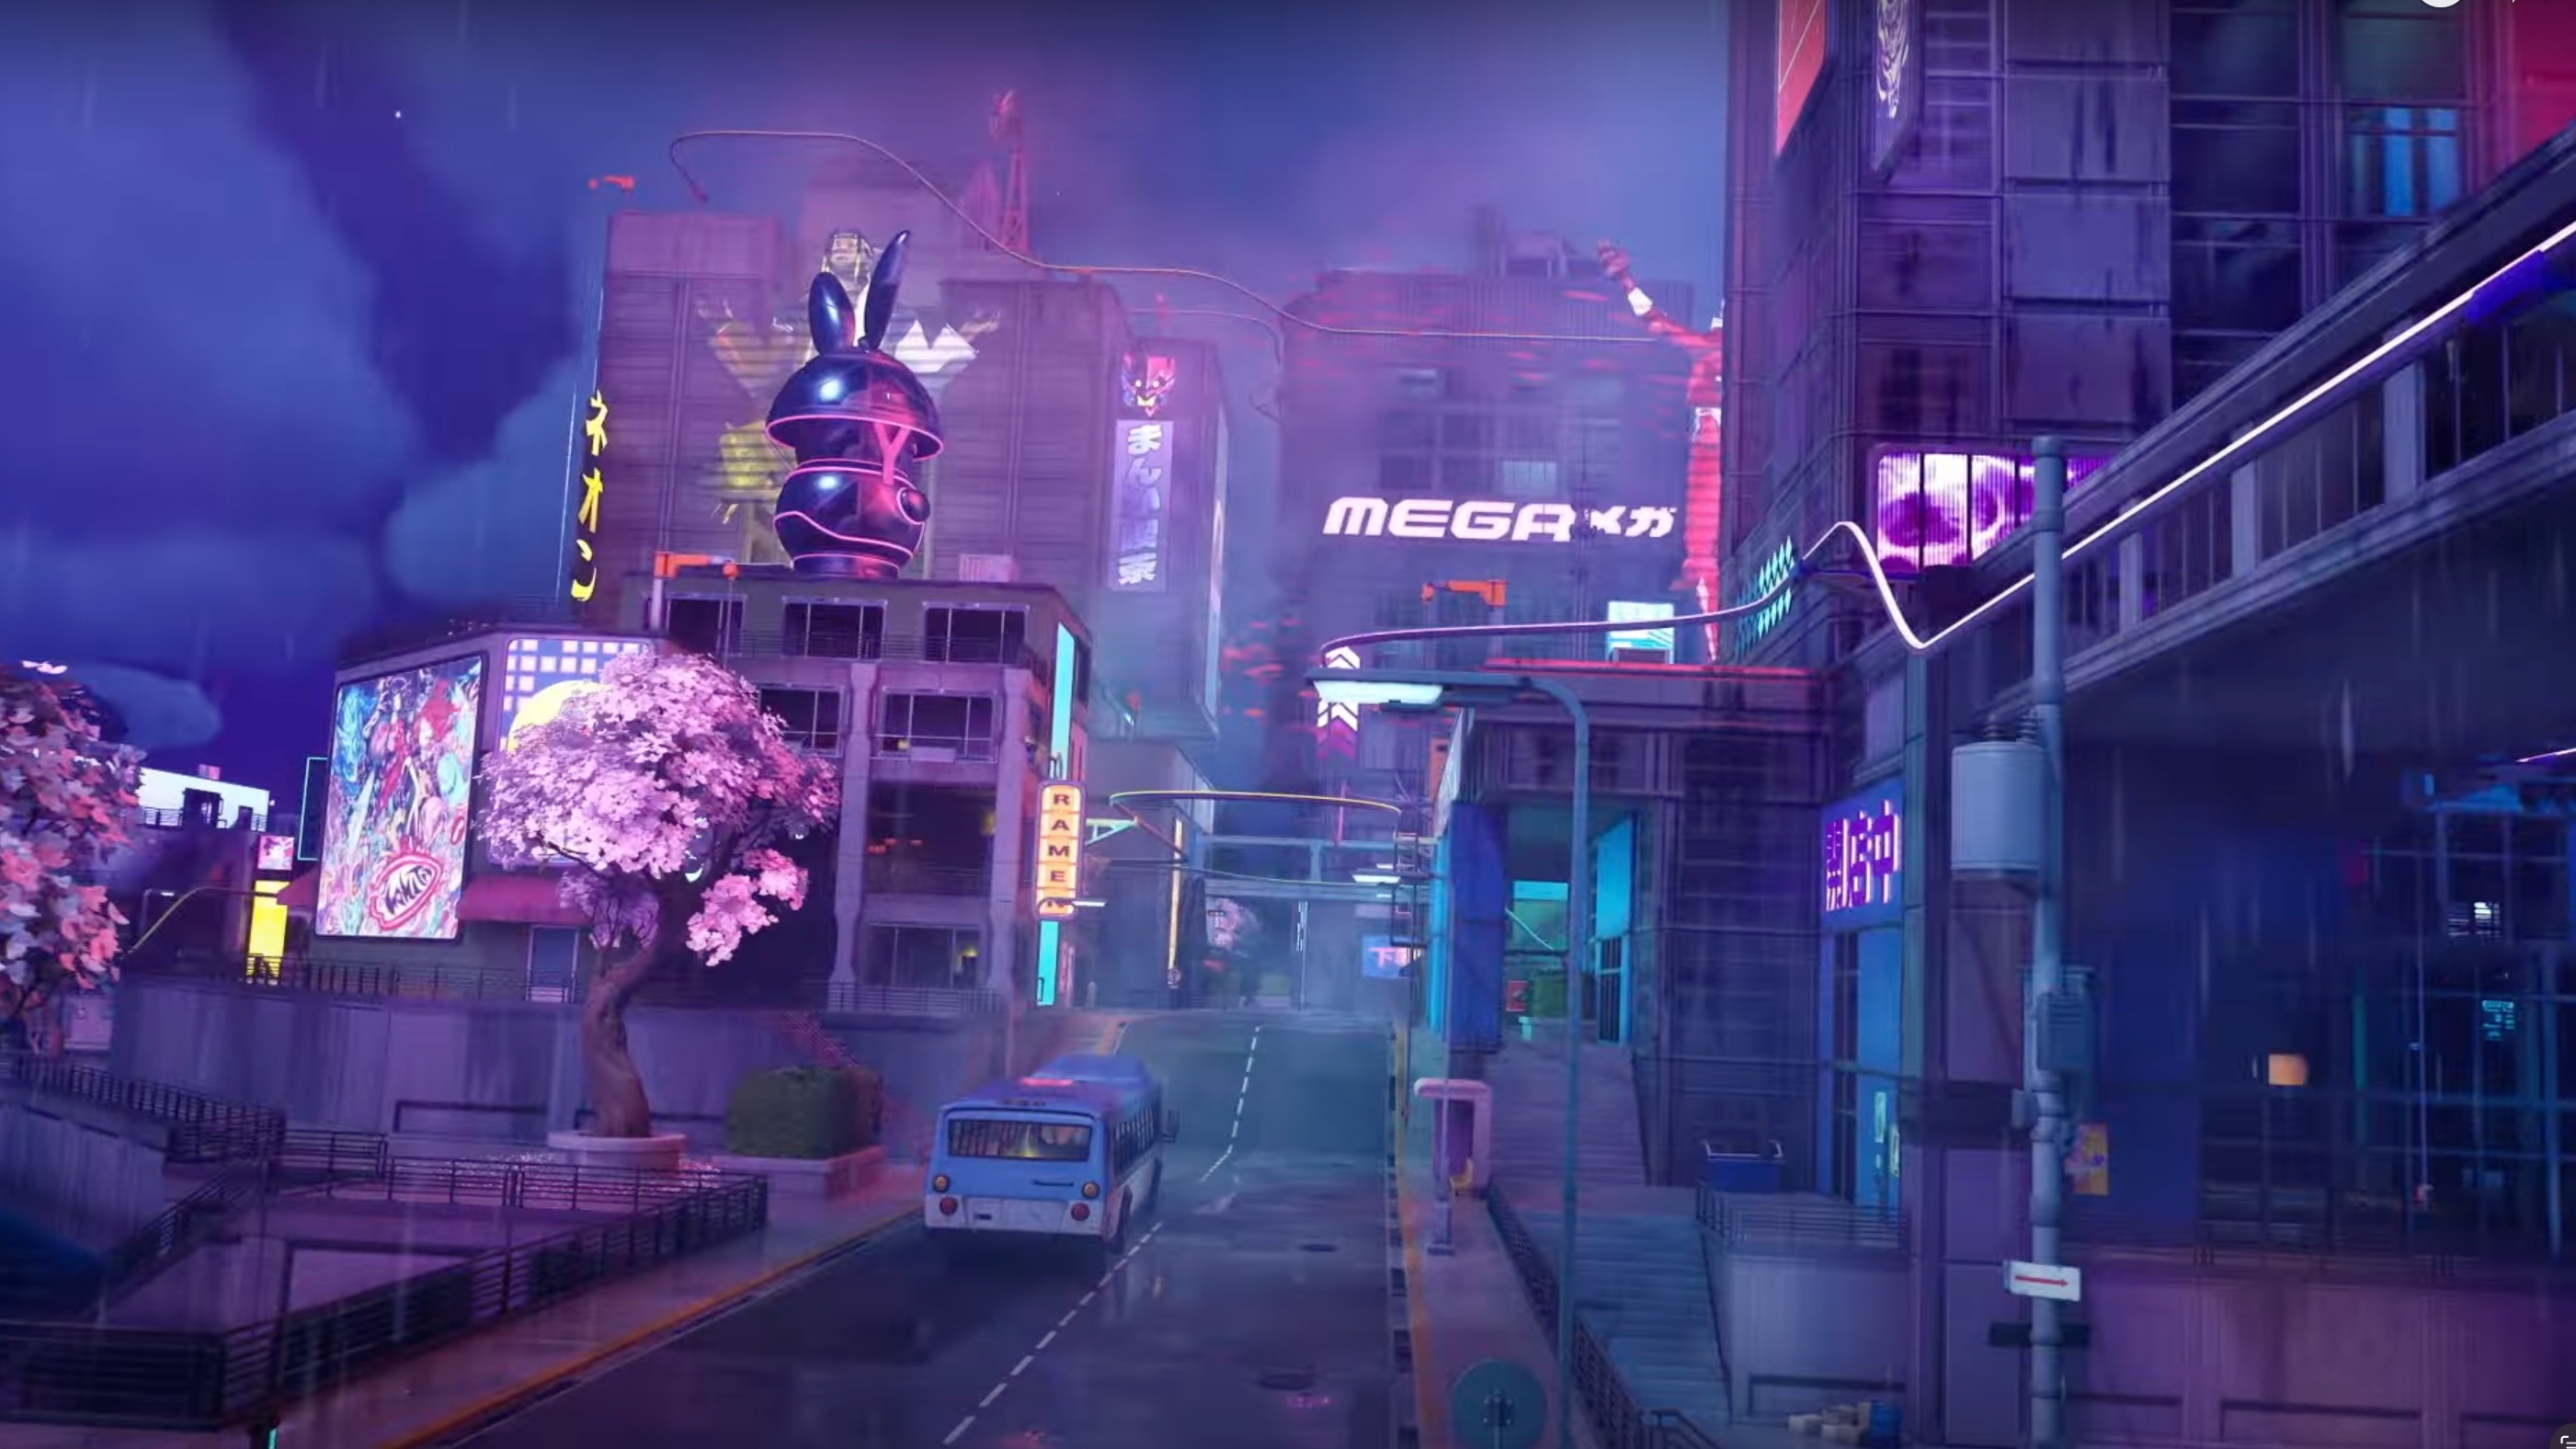 Fortnite News's your first look at the #FortniteMEGA Mega City POI